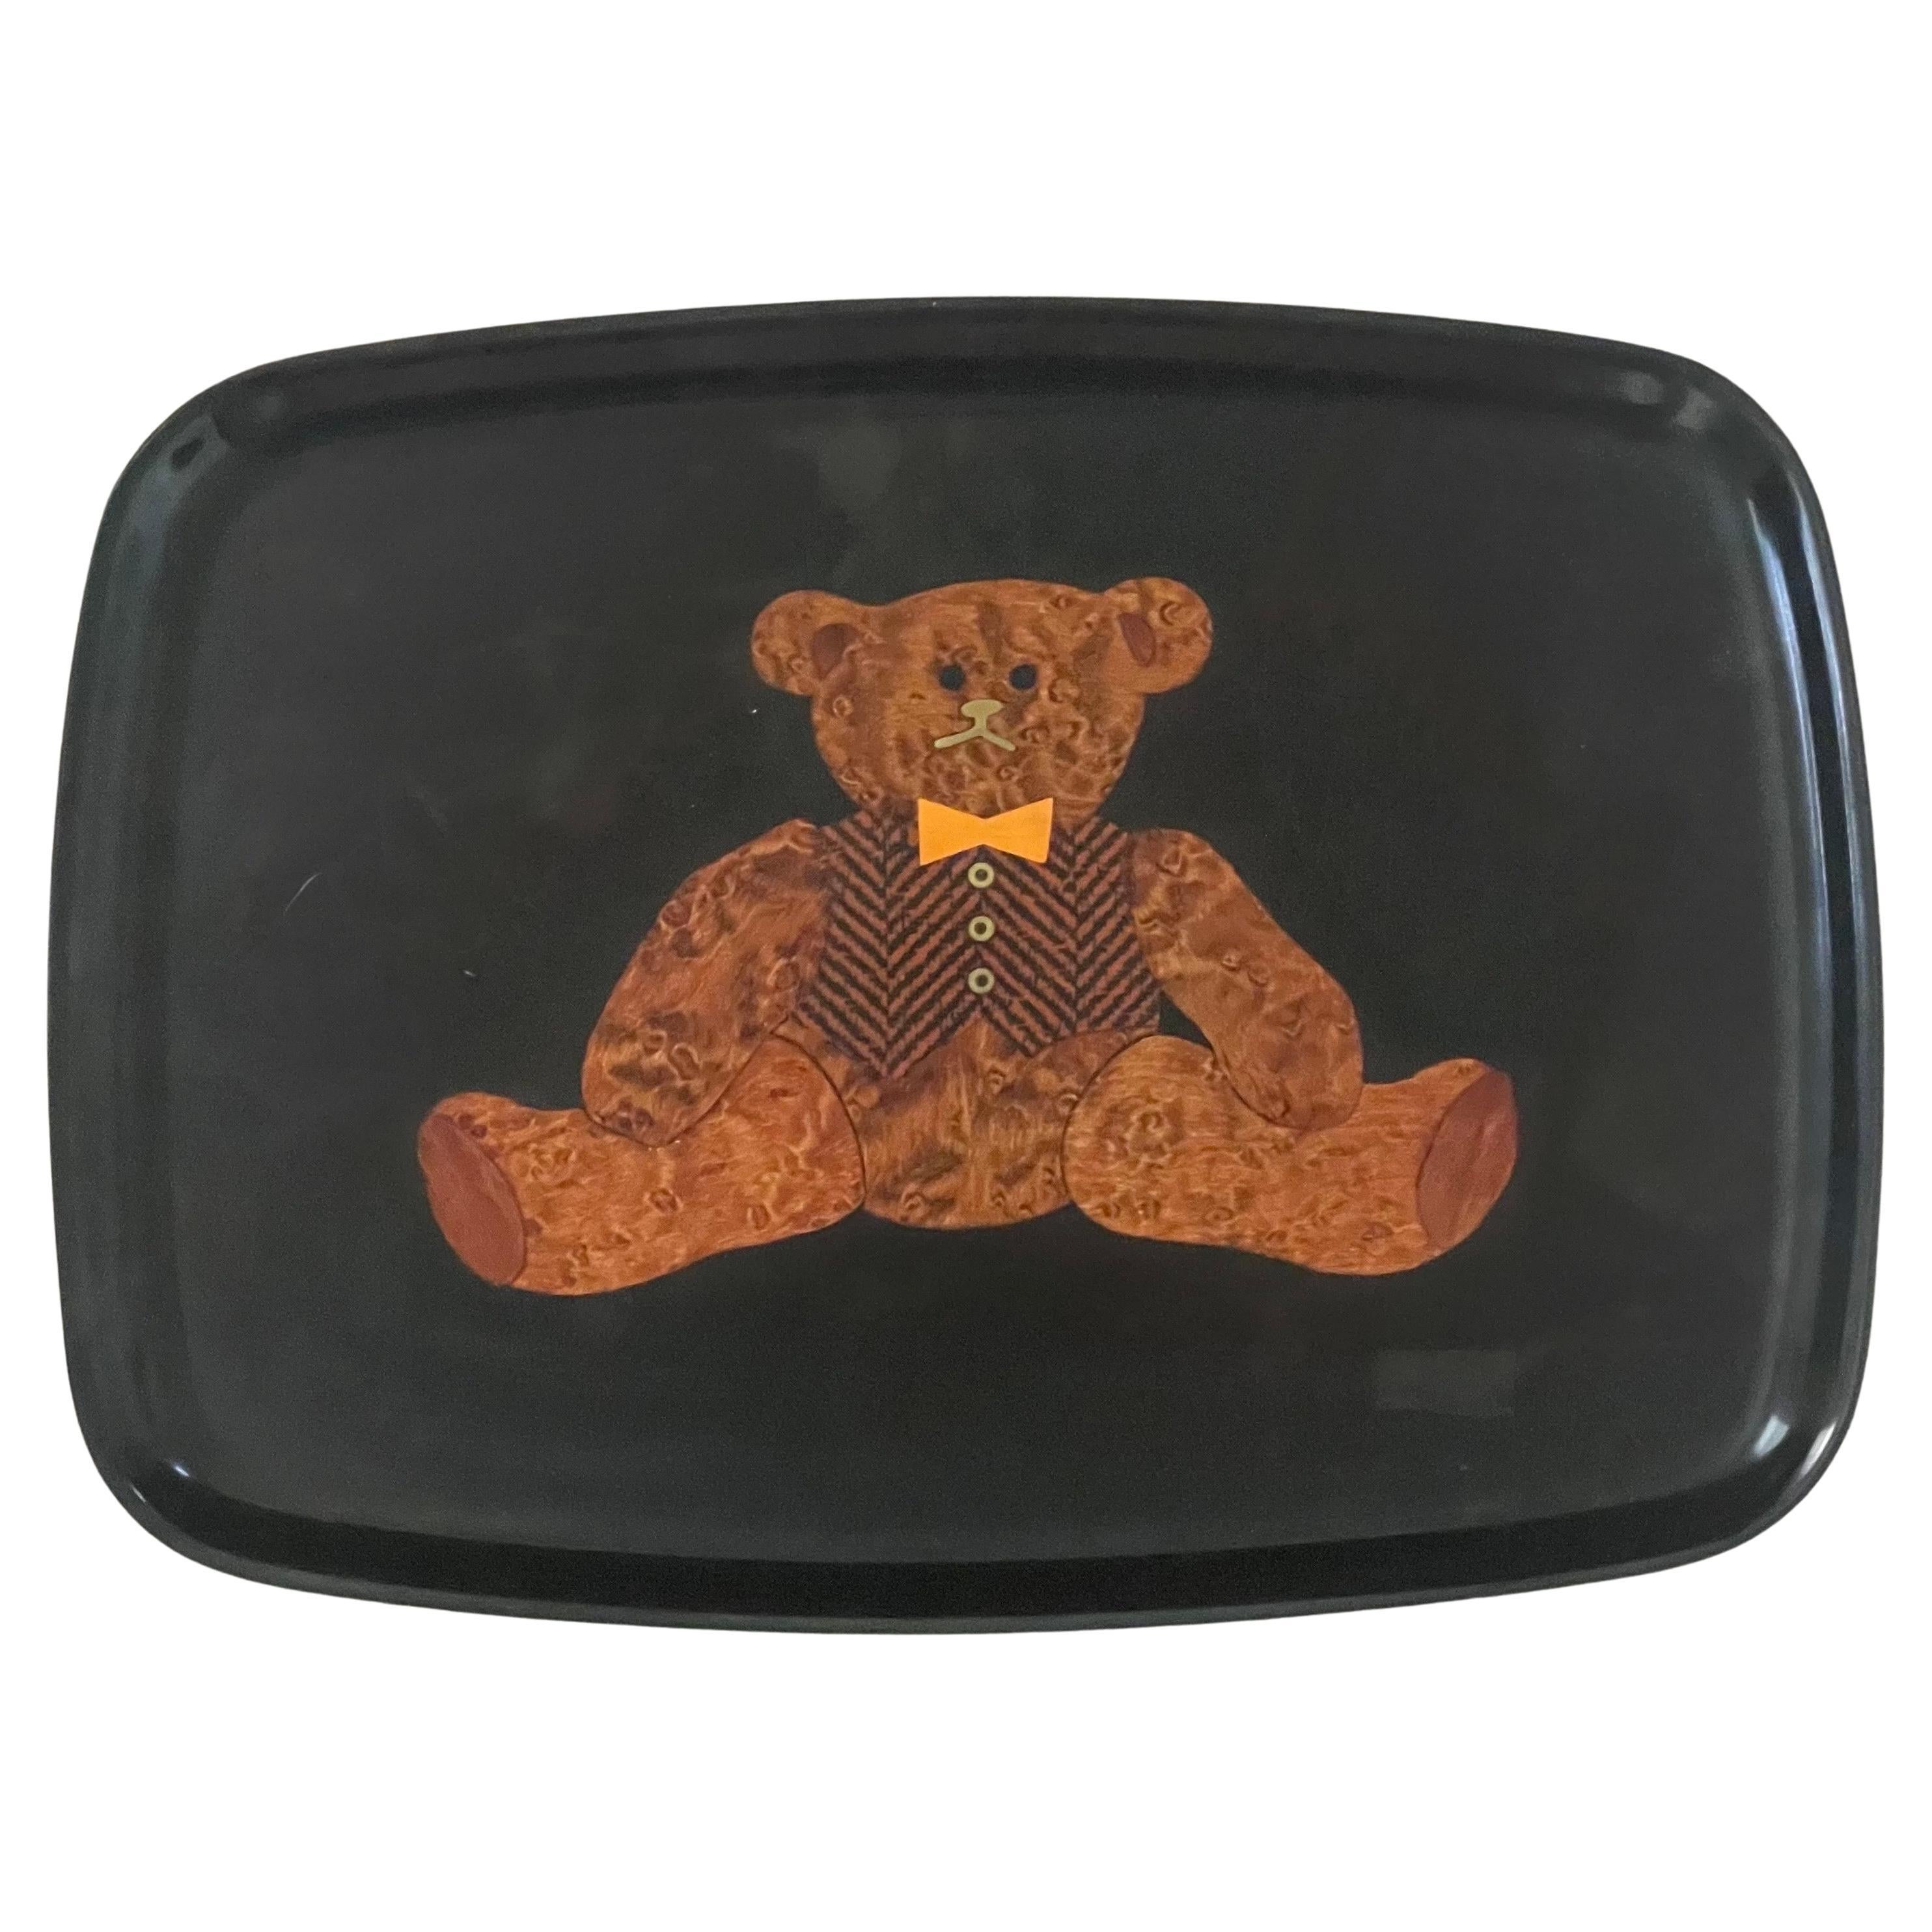 Inlaid Wood "Teddy Bear" Tray by Couroc California For Sale